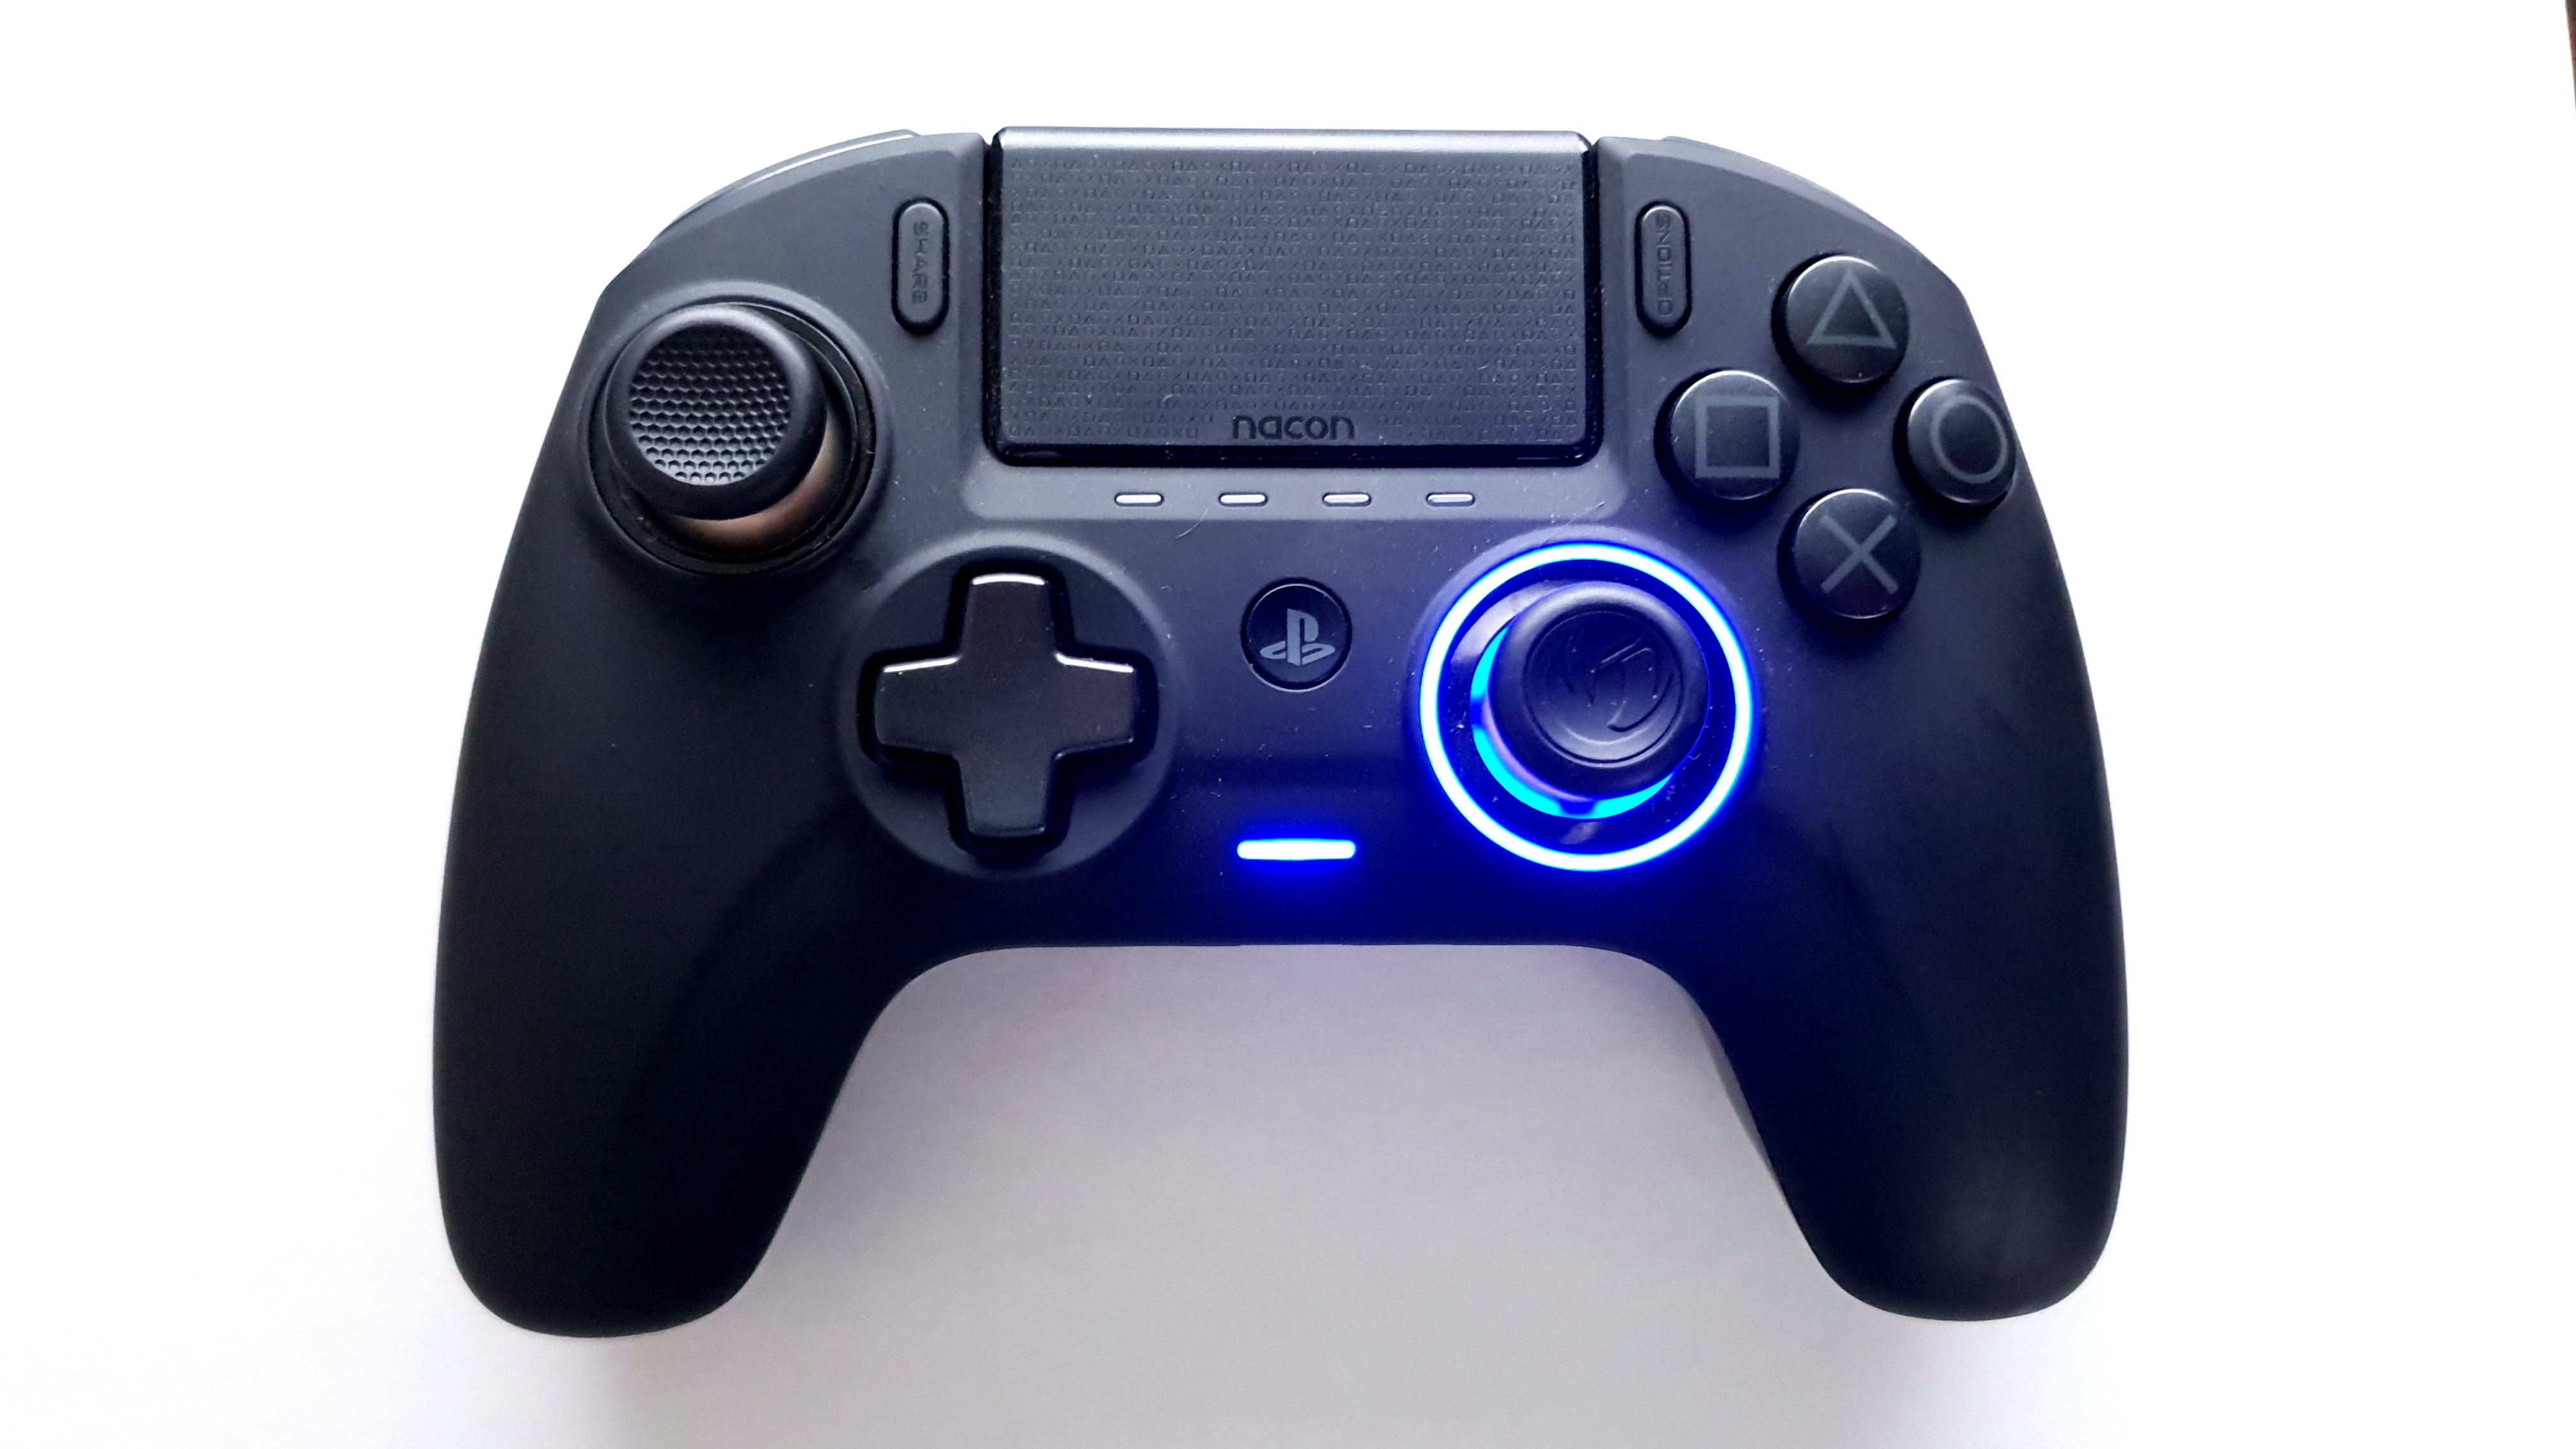 snakebyte gamepad 4s ps4 a pc